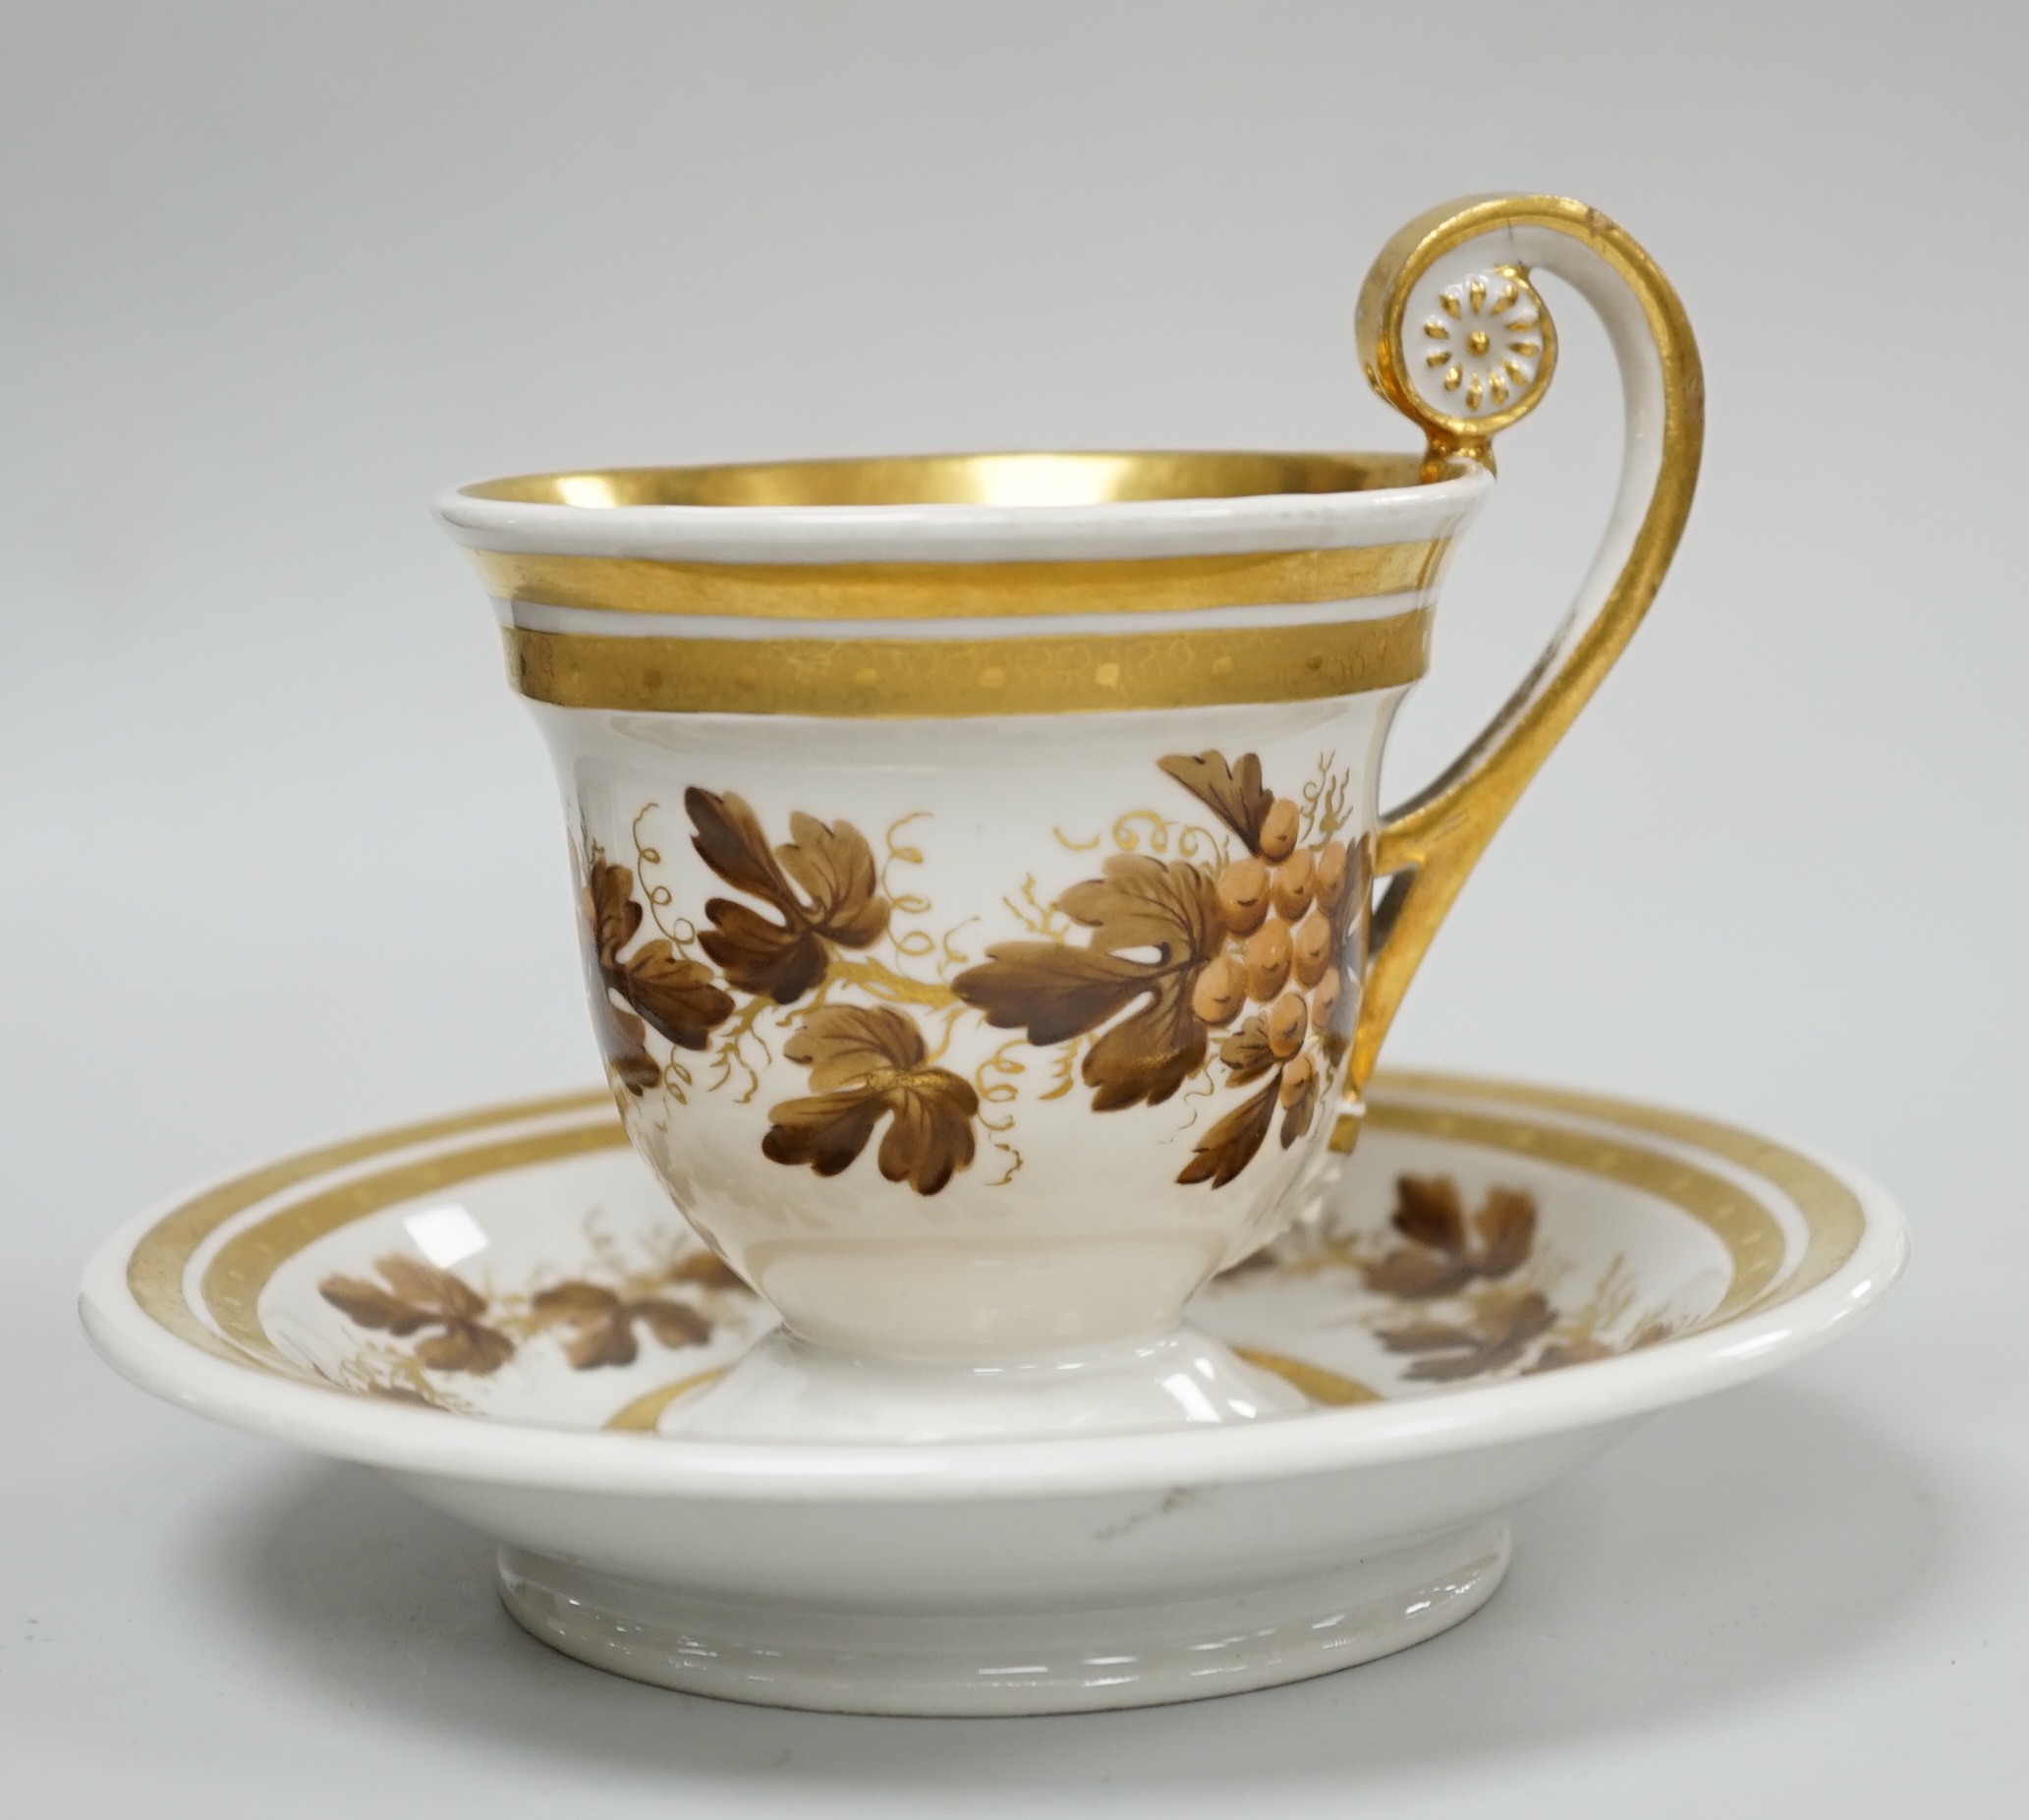 An early 19th century Furstenburg brown and white cup and saucer, saucer diameter 13cm